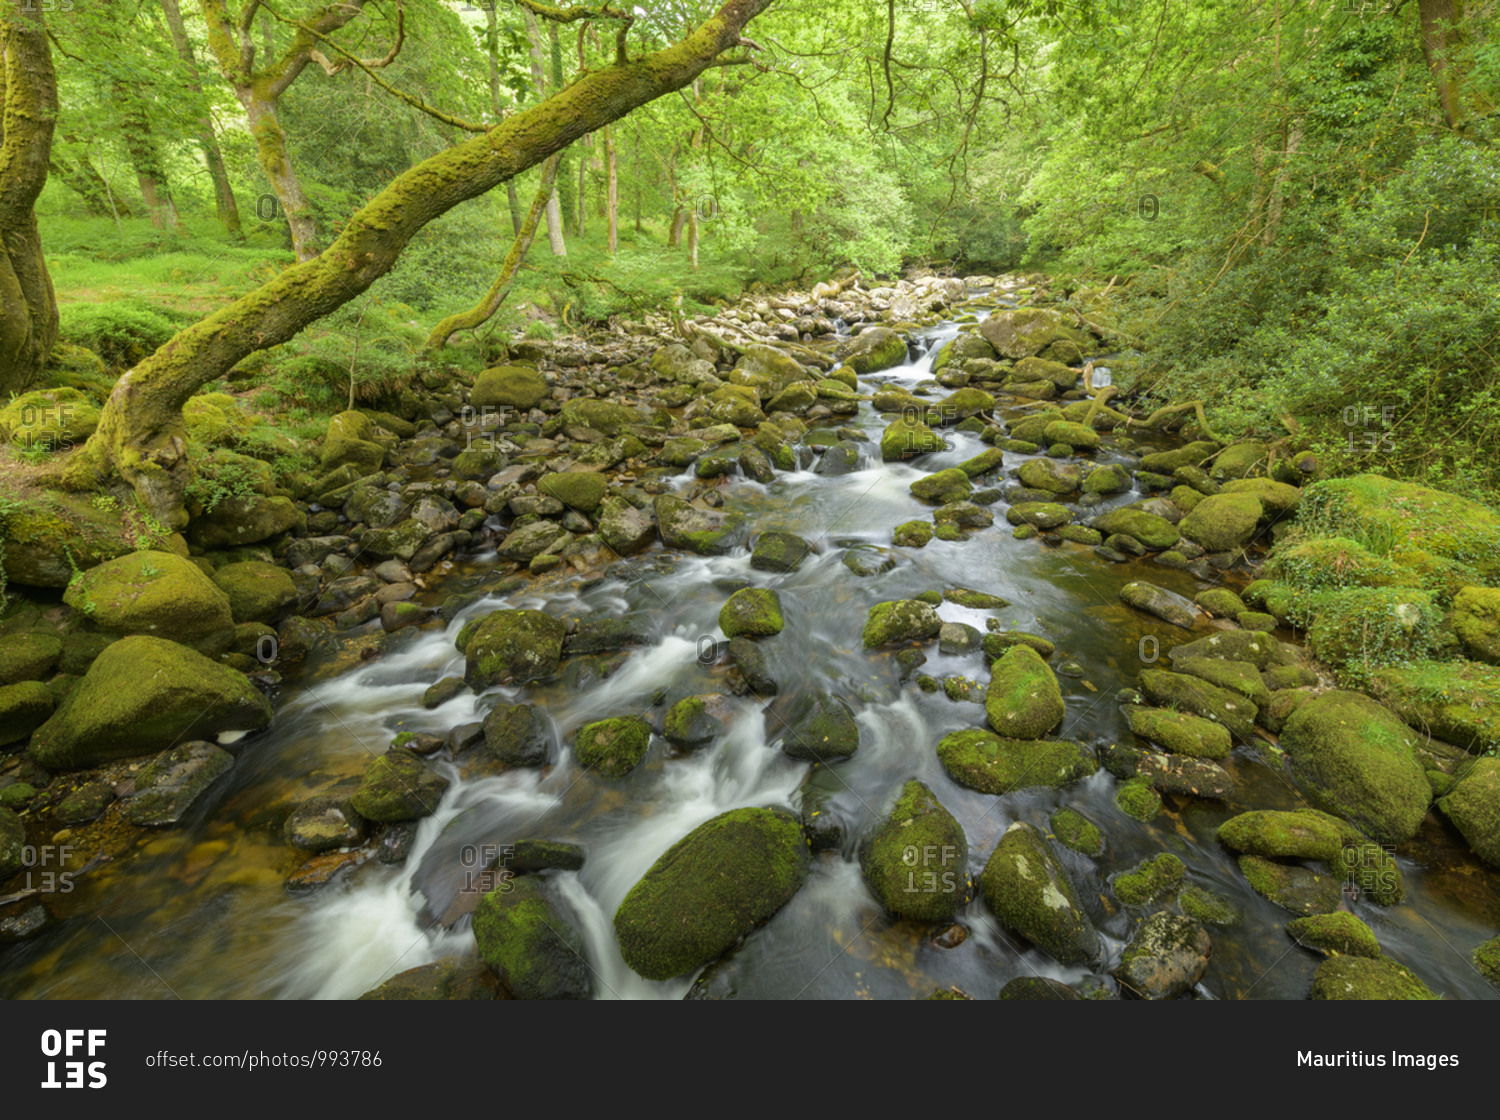 River in the forest, River plym, Dewerstone wood, Plymouth, Devon, England, United Kingdom, Europe